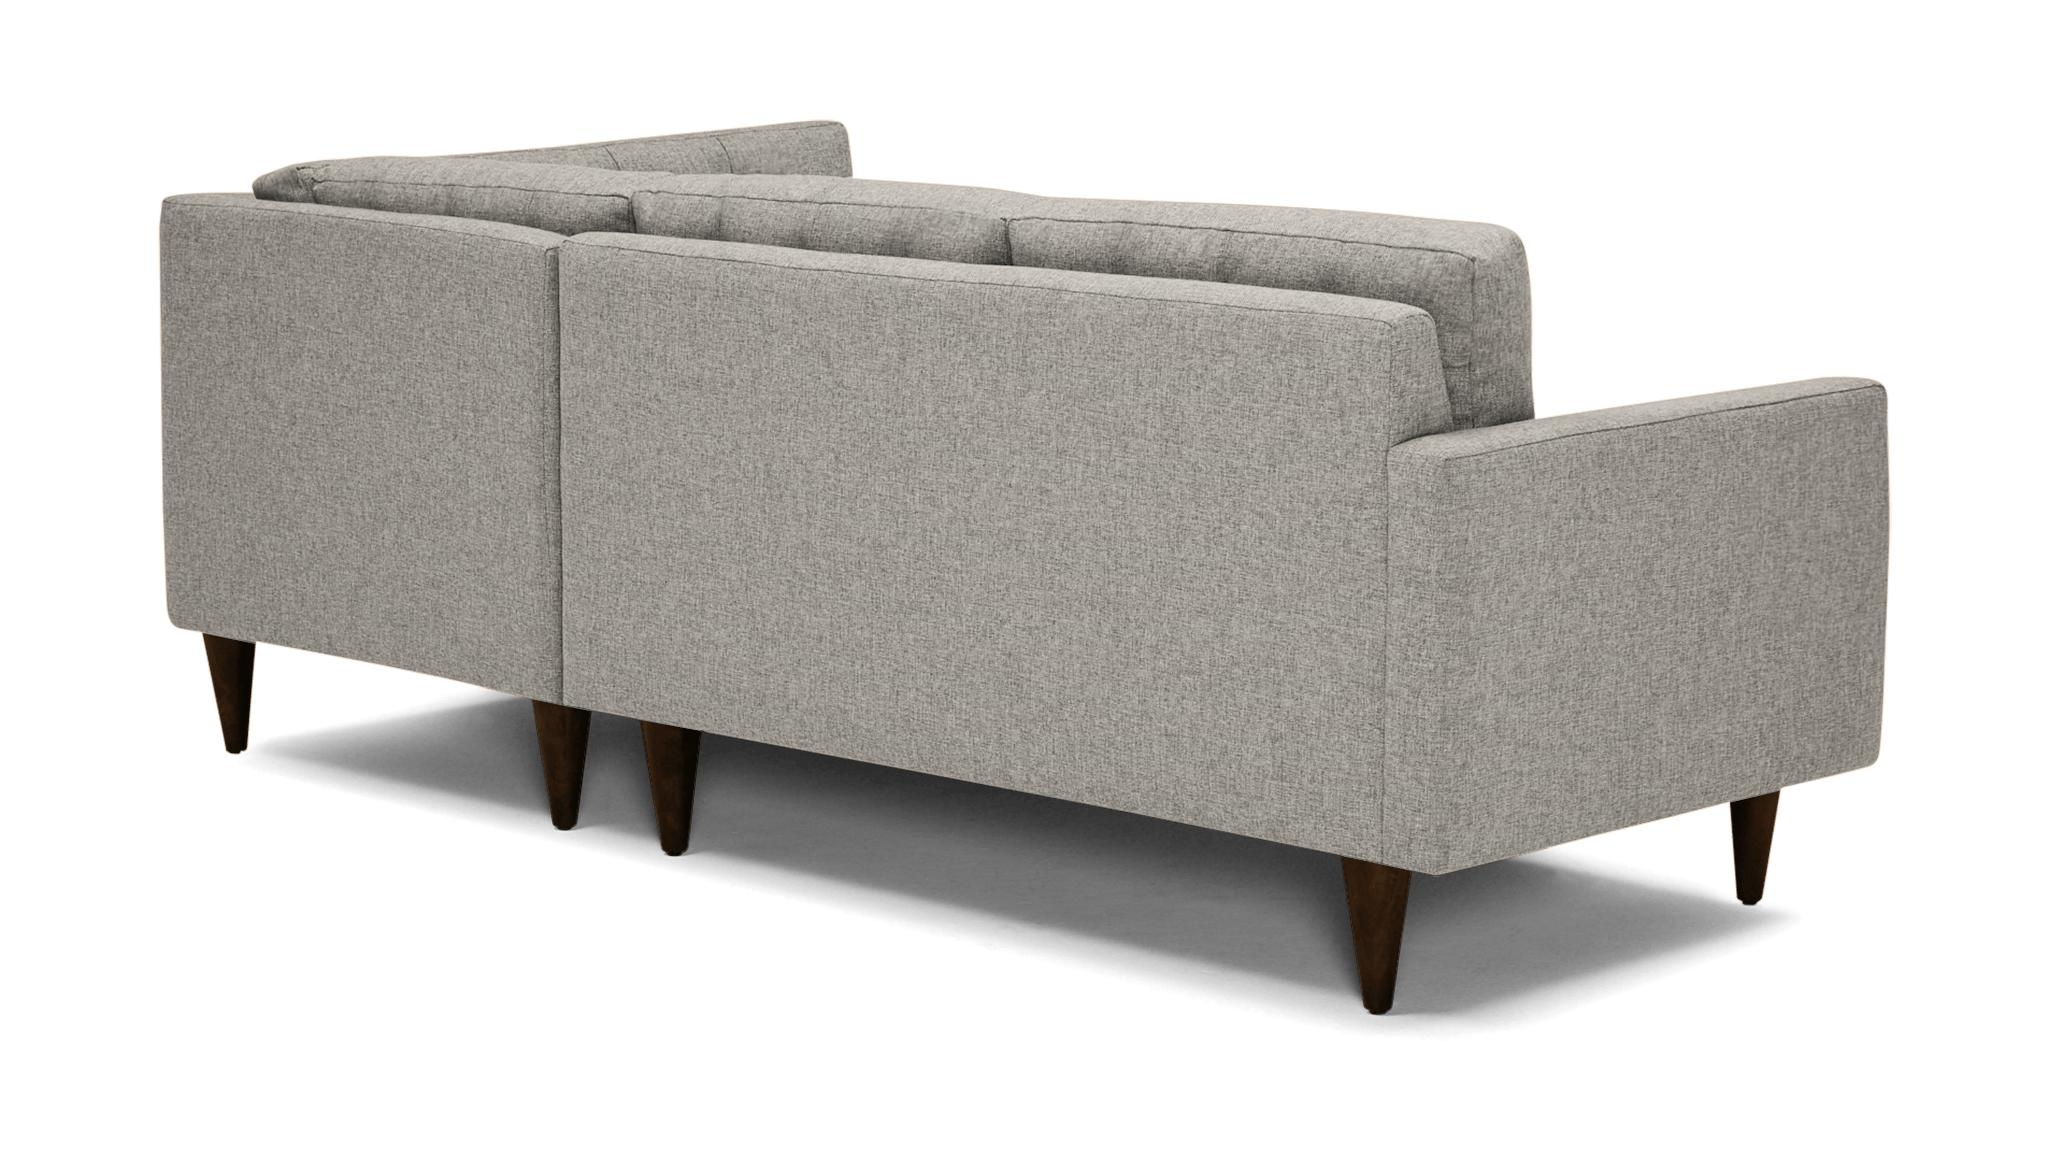 White Eliot Mid Century Modern Apartment Sectional with Bumper - Bloke Cotton - Mocha - Right  - Image 3